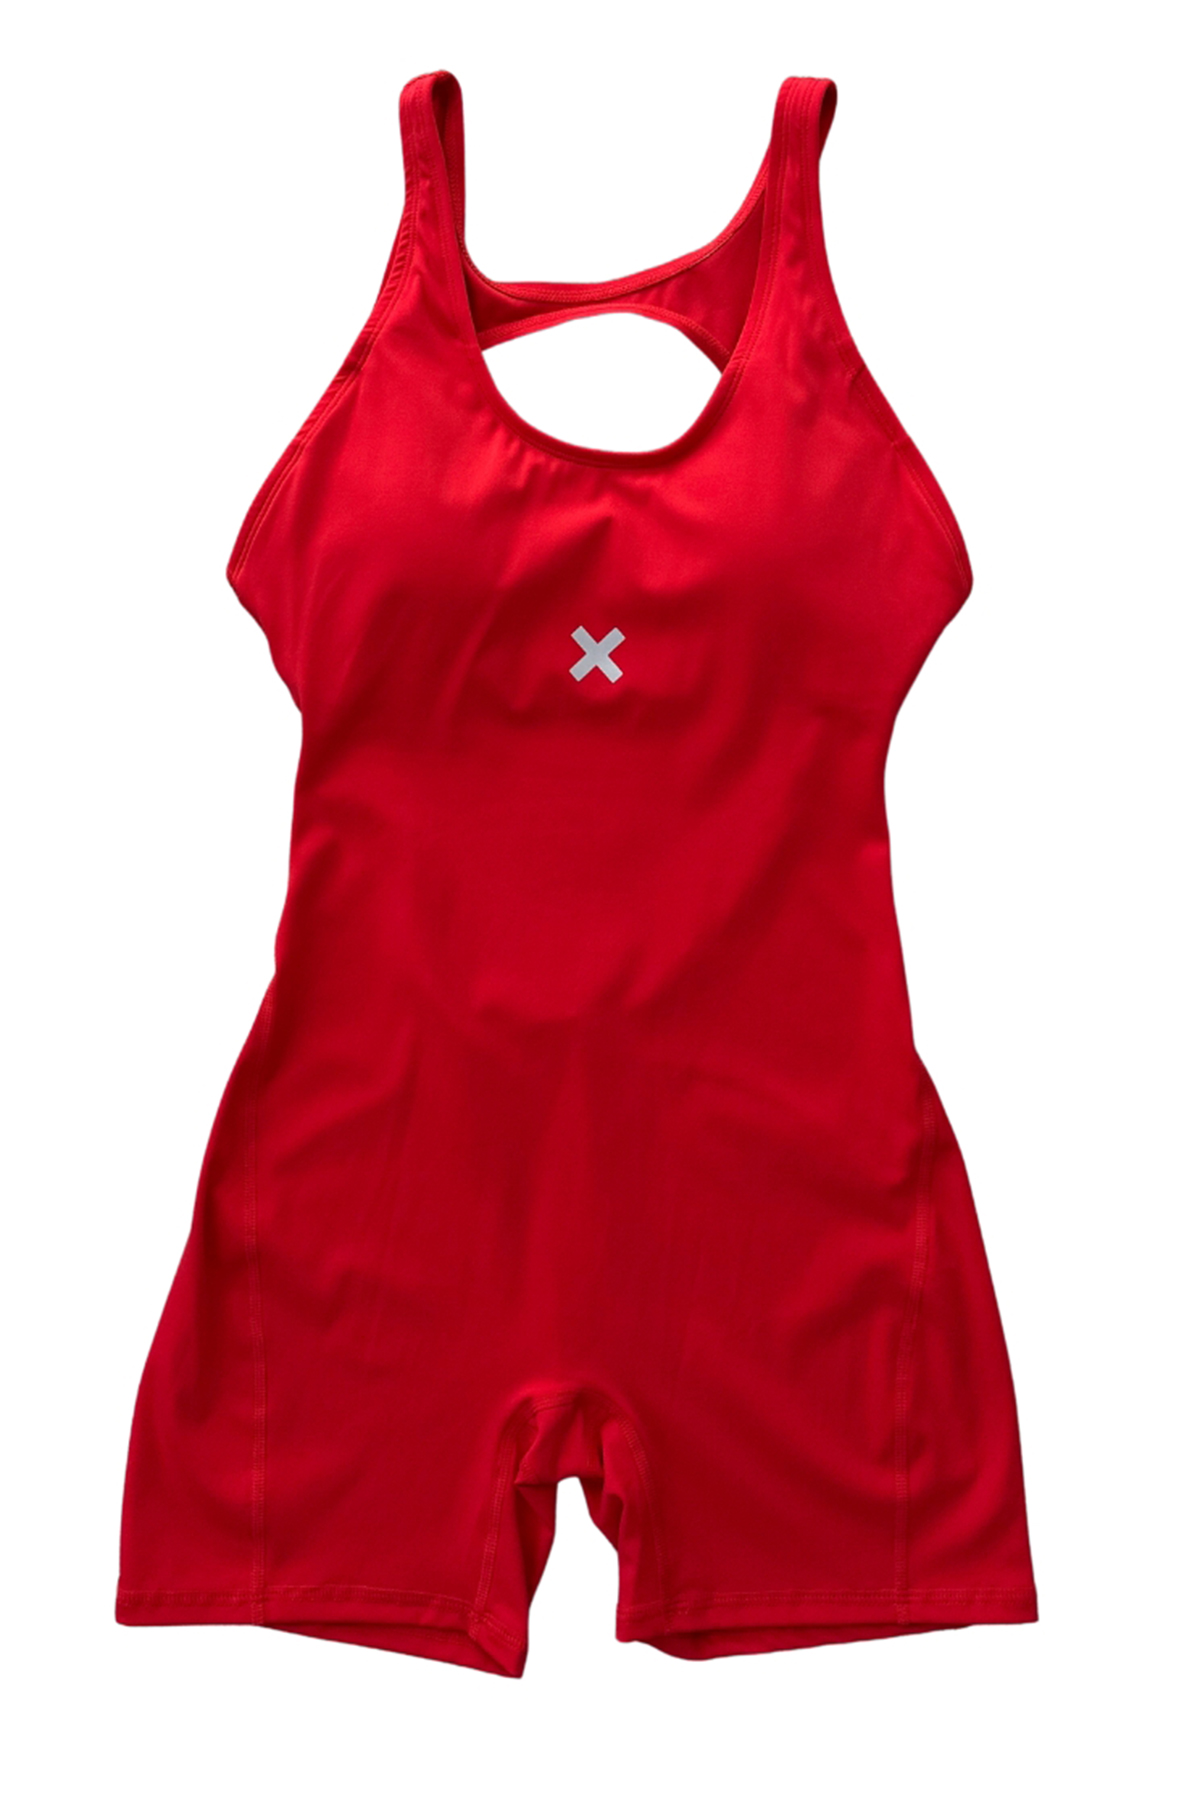 Mini-Short-Cut-out-Bodysuit-for-Exercising-red-front